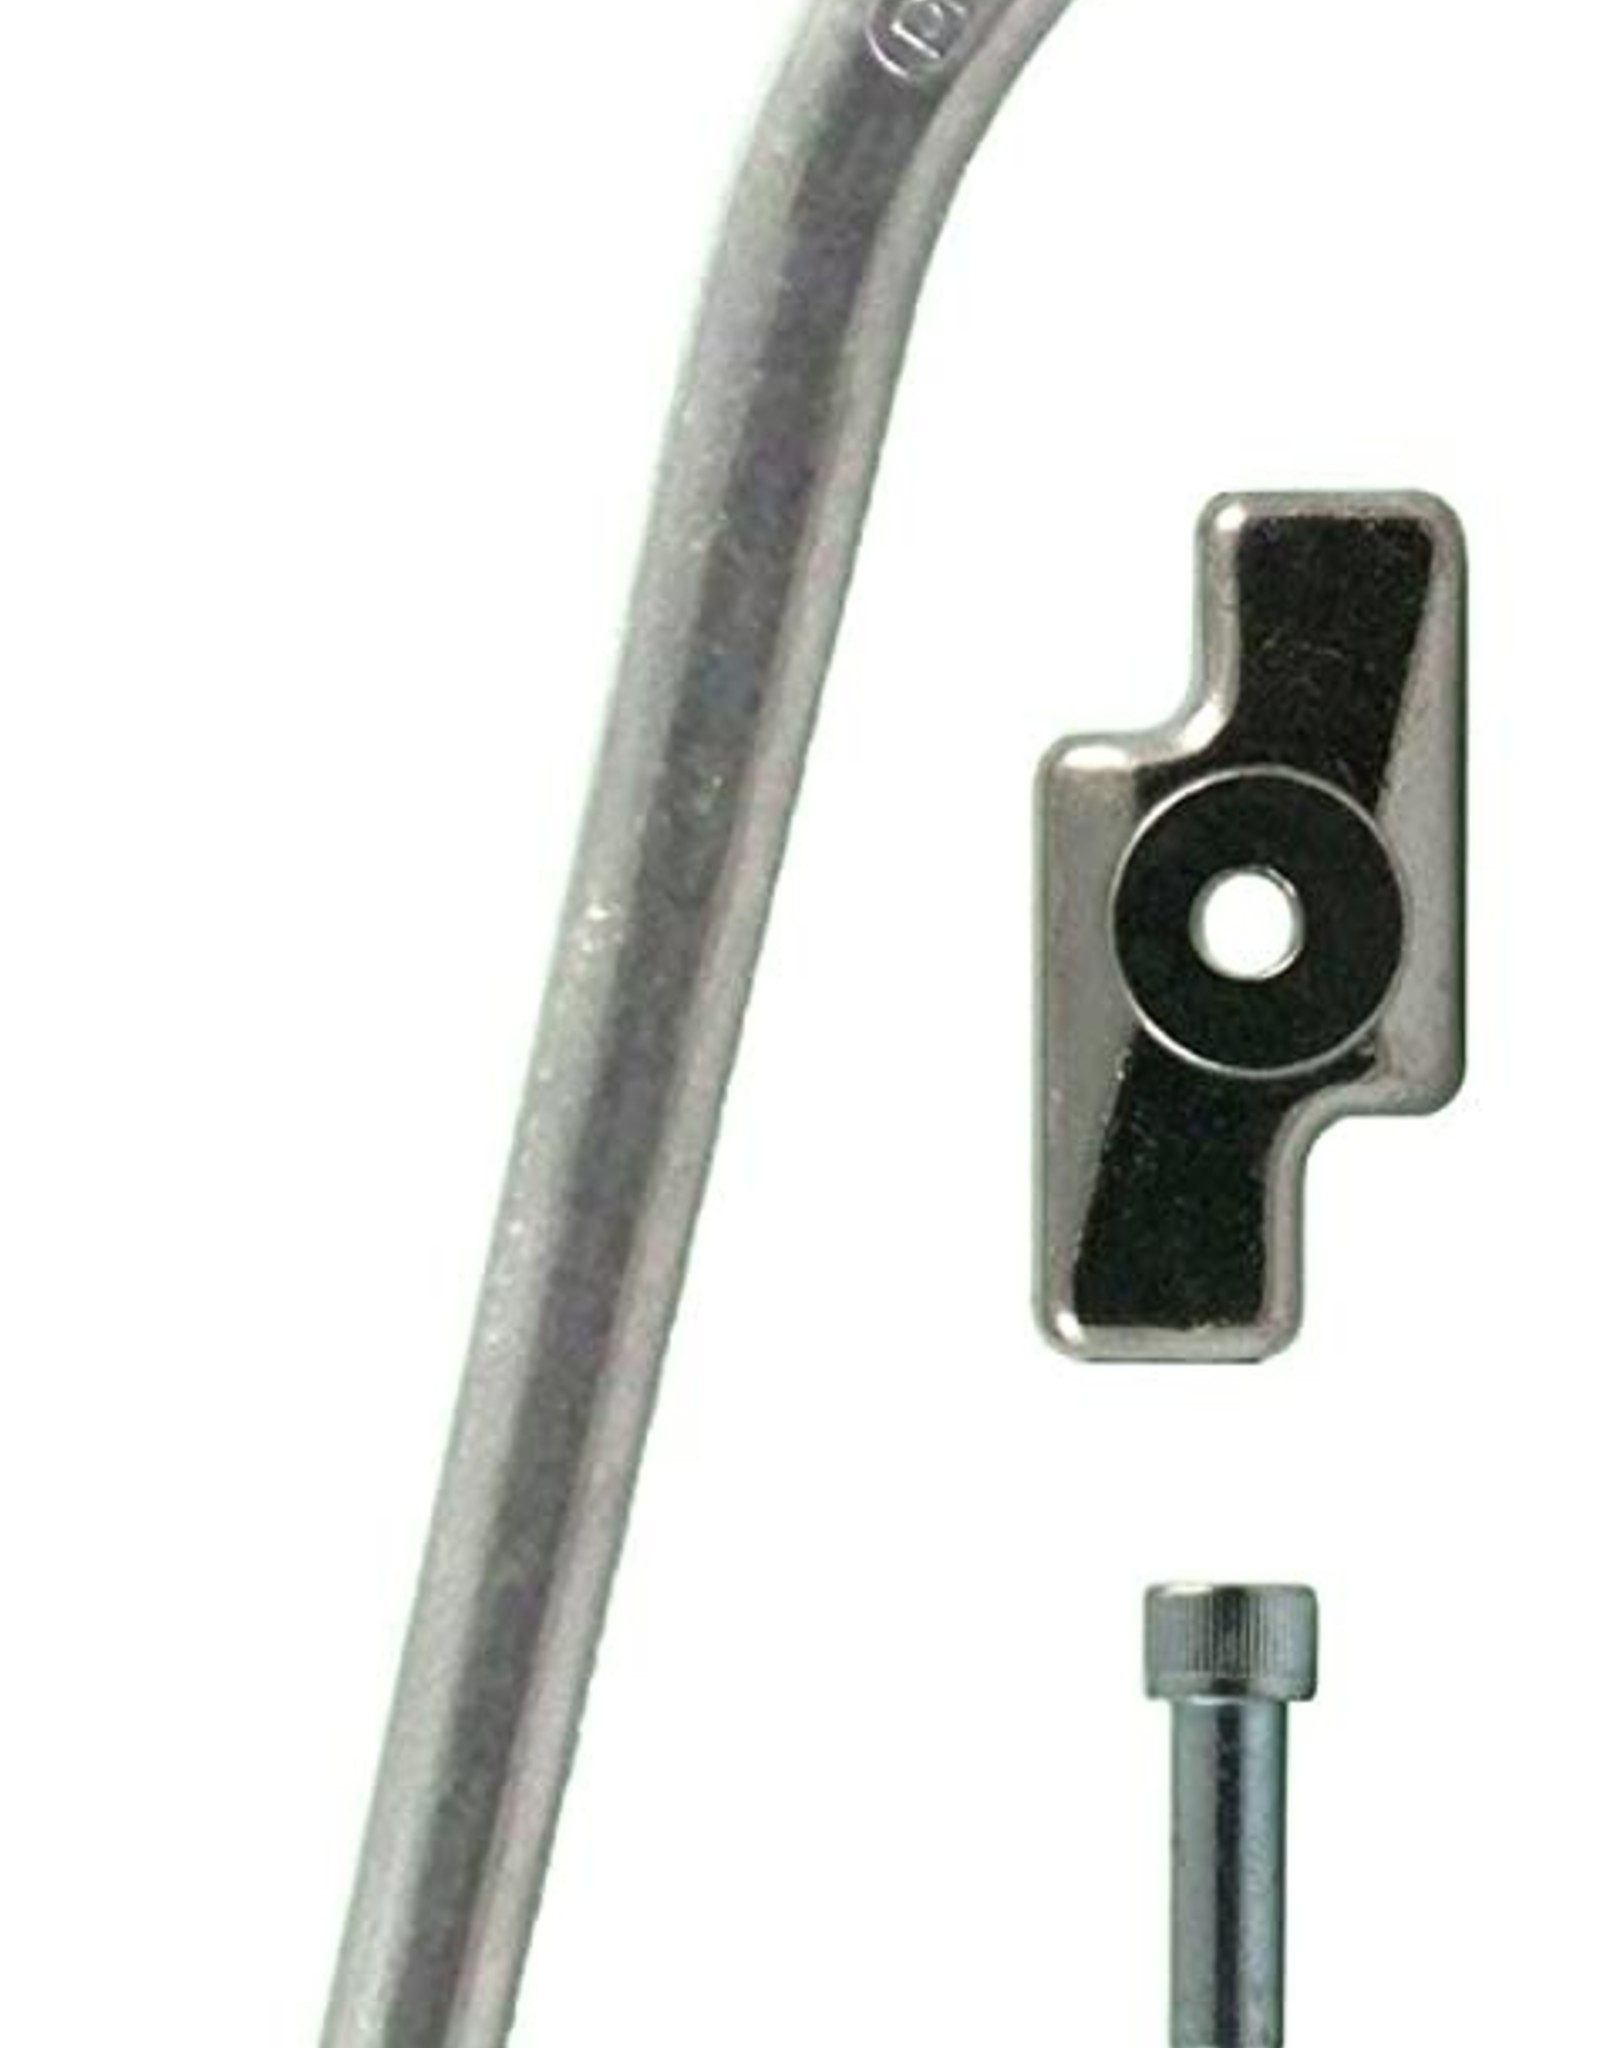 Greenfield 285mm KS2-S Kickstand with Retro-kit Top Plate for Improved Clearance: Silver